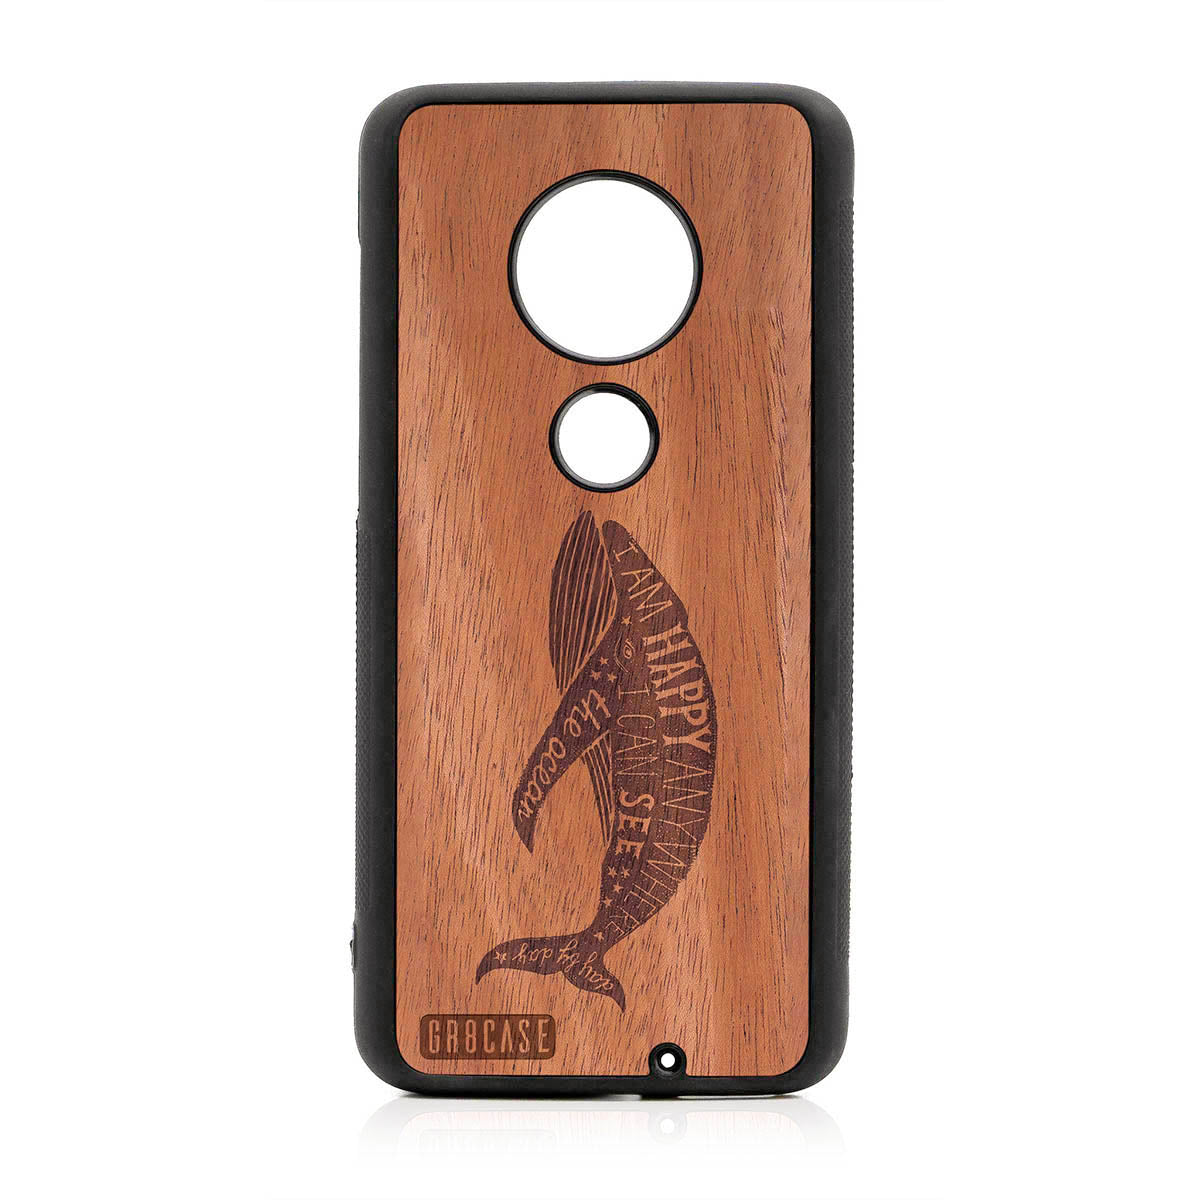 I'm Happy Anywhere I Can See The Ocean (Whale) Design Wood Case For Moto G7 Plus